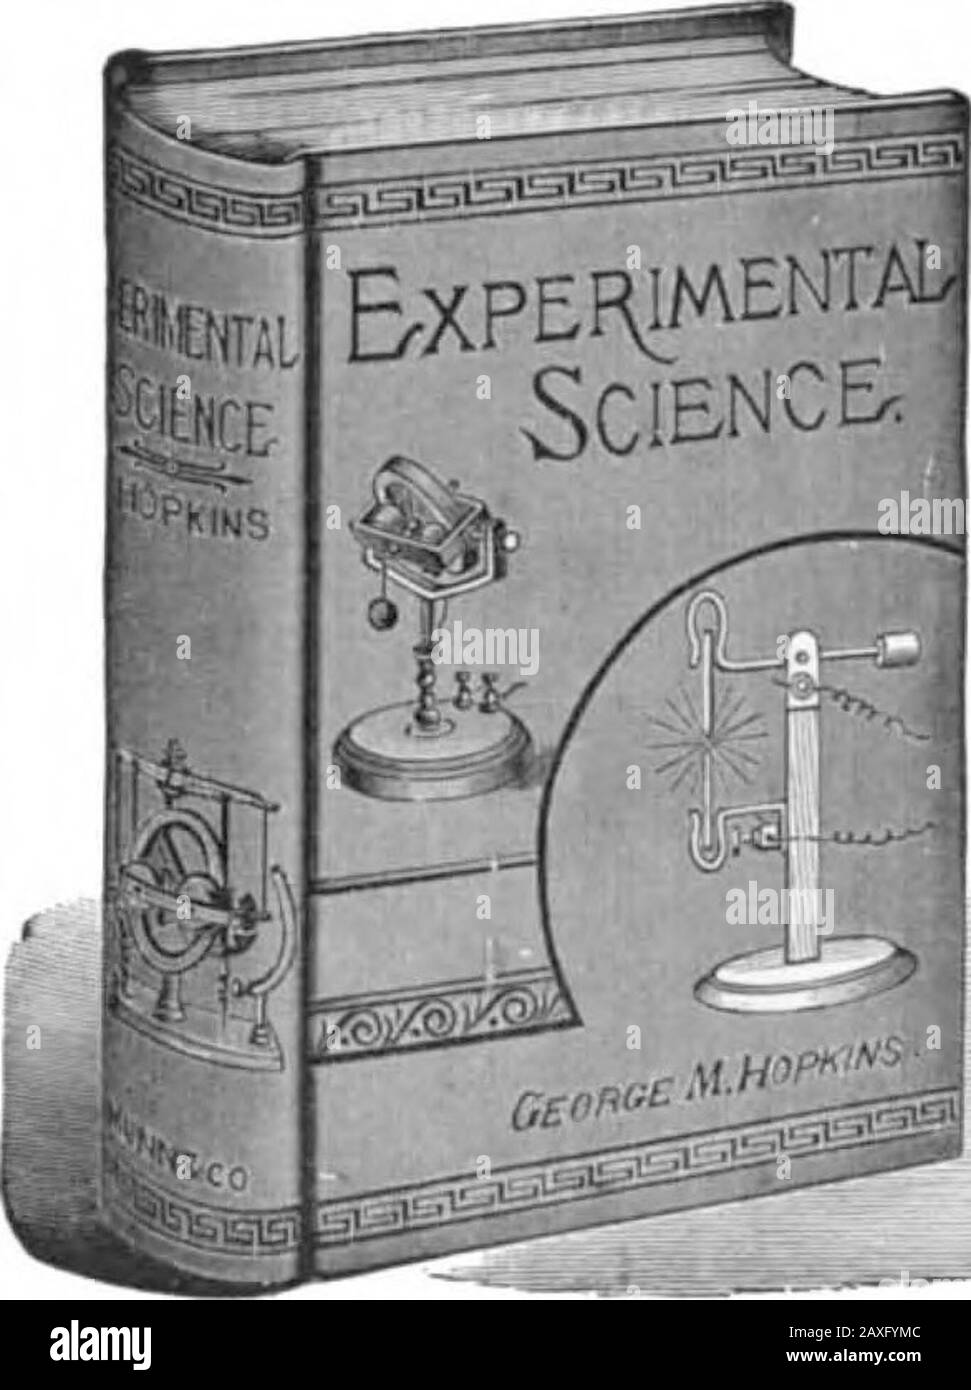 Scientific American Volume 77 Number 05 (July 1897) . Experimental Science By GEO. M. HOPKINS. 17th Edition Revised and Enlarged. Steam engine, C. F. Sparks 586,877 Storage heater, J. F. McElroy 586,932 Storage tank, self measuring, J. H. Martindale... 586,855 Stove or range grate, E. Weiss 586,886 Strainer, cistern, I. Holmes 586,662 Strap. See Picker check strap. Switch. See Electric switch. Railway switch. Switch mechanism, electrically actuated, W. S. Browne..... 586,702 Syringe, J. A. Groeninger 586,657 Syringe and electrical apparatus, combined, L. G. Woolley 586,679 Table. See Rolling m Stock Photo